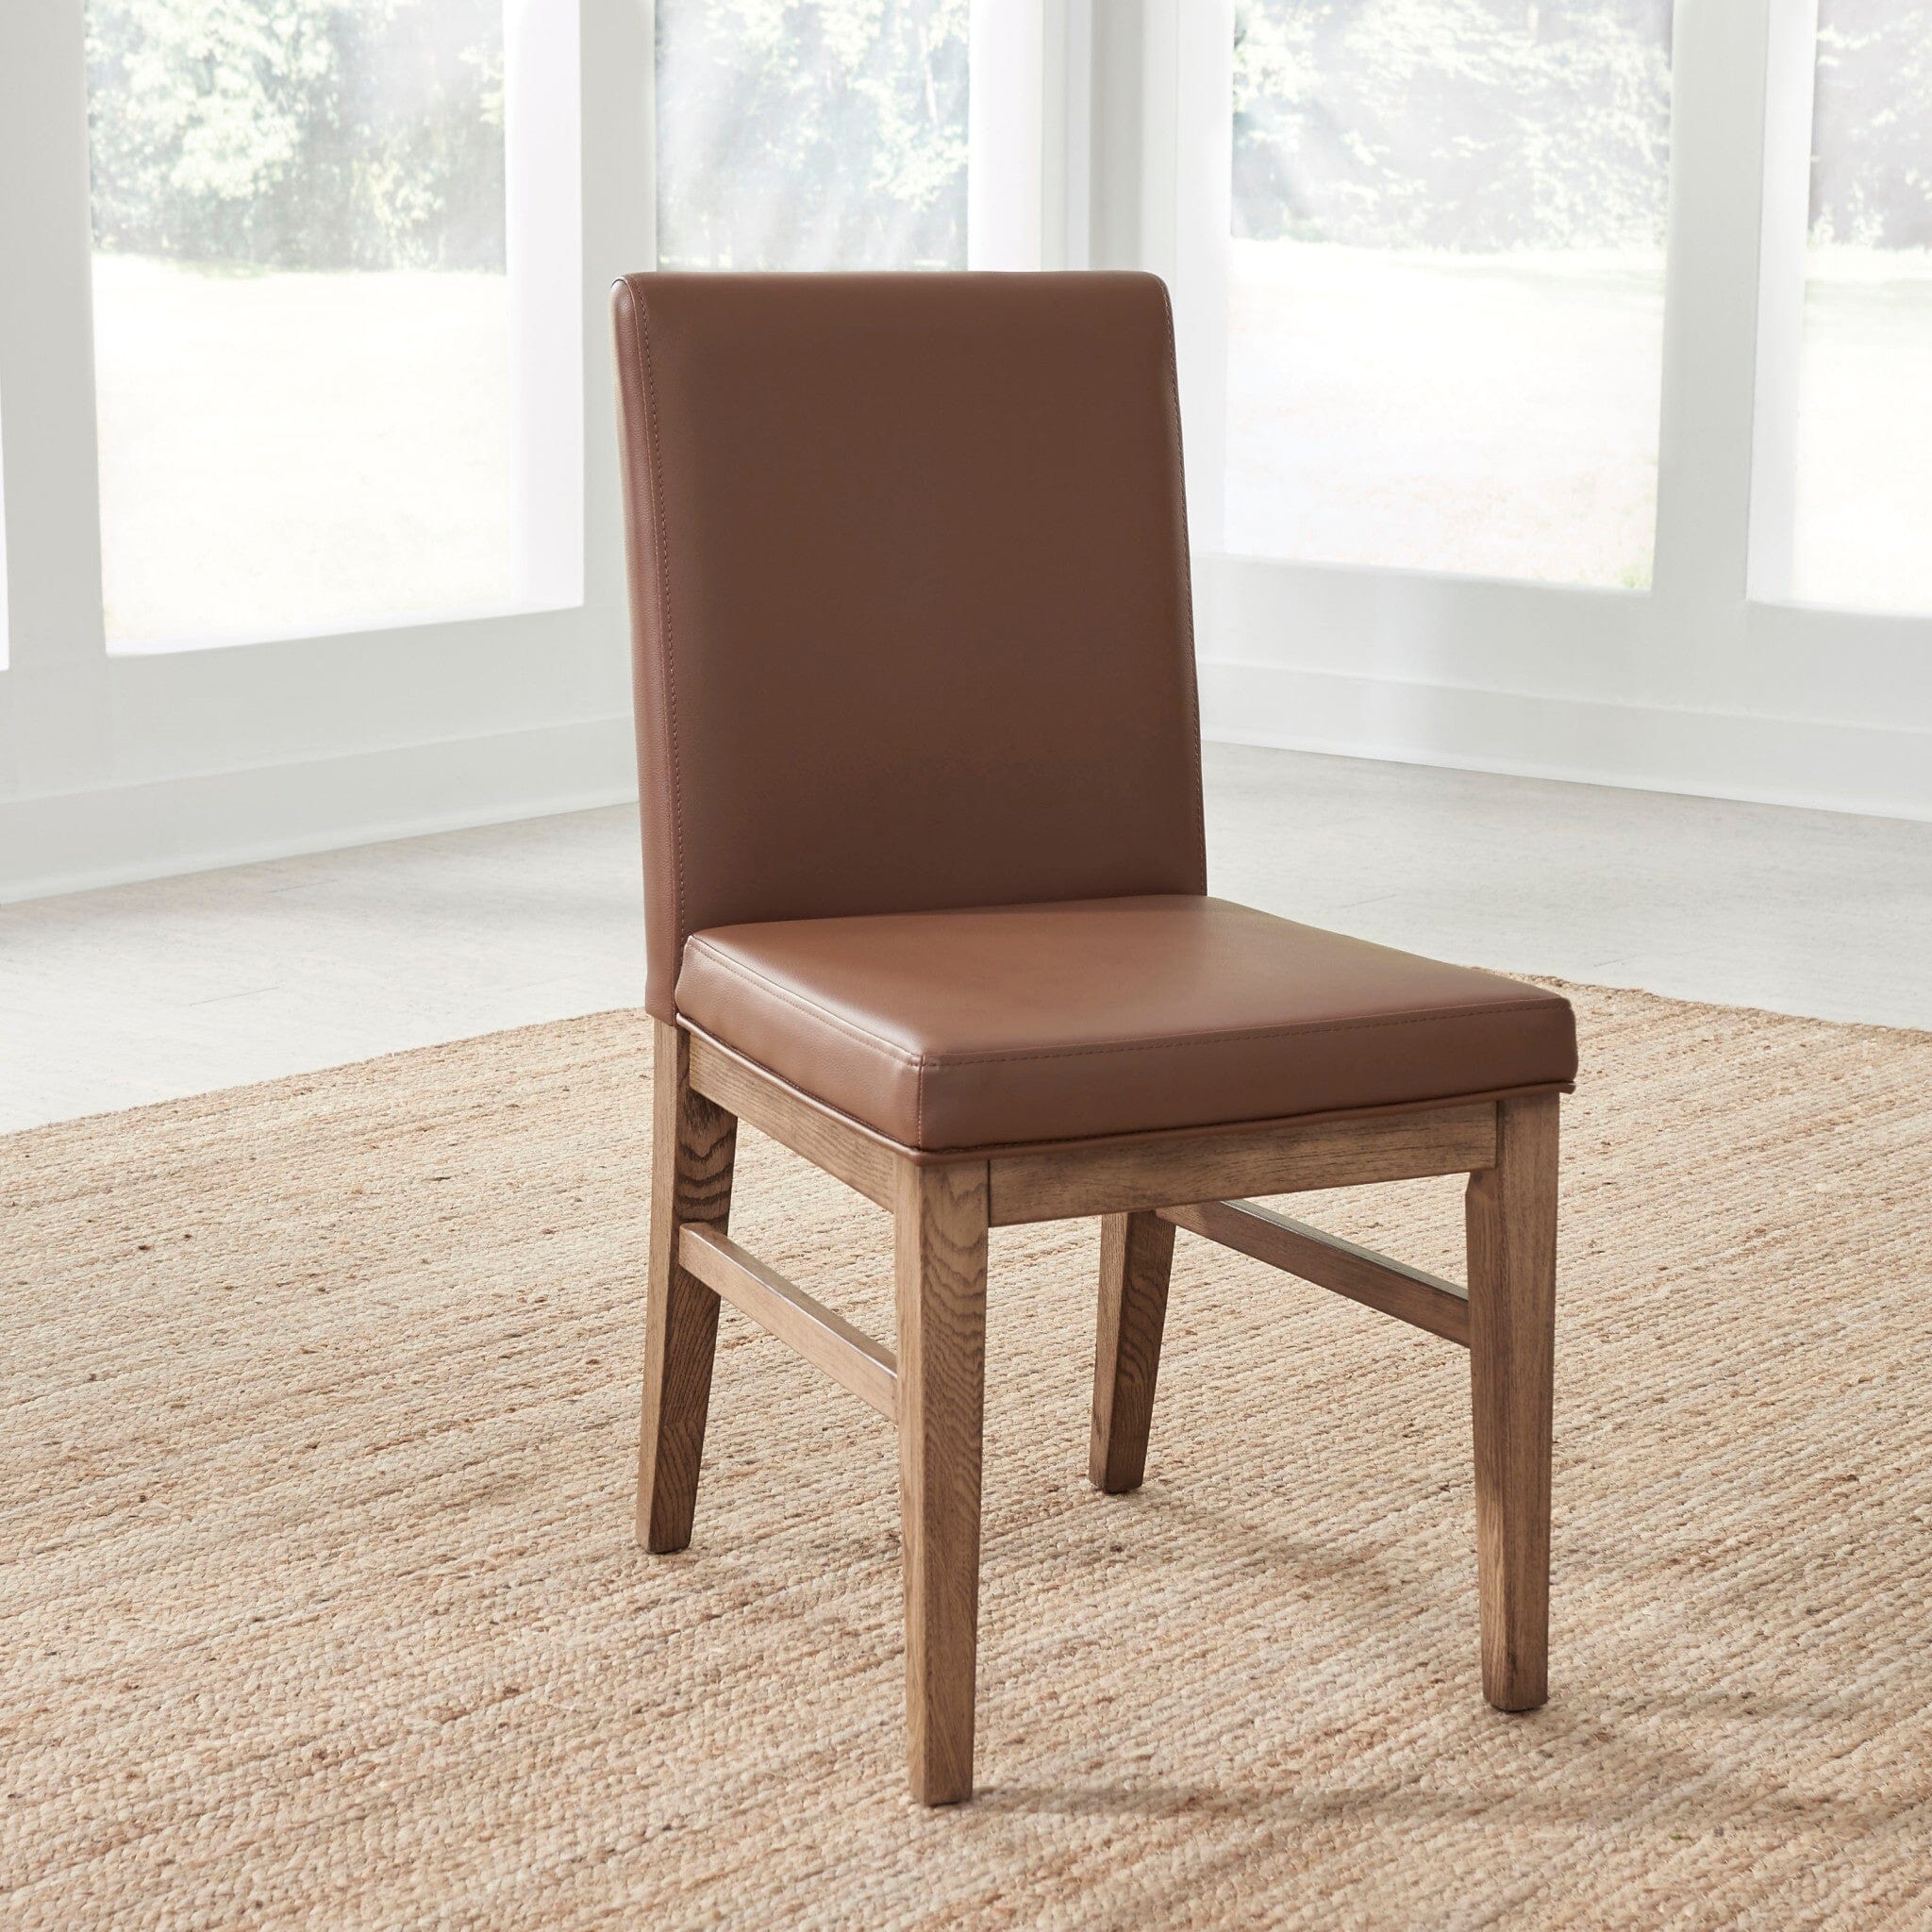 Modern & Contemporary Upholstered Dining Chair Pair By Big Sur Dining Chair Big Sur